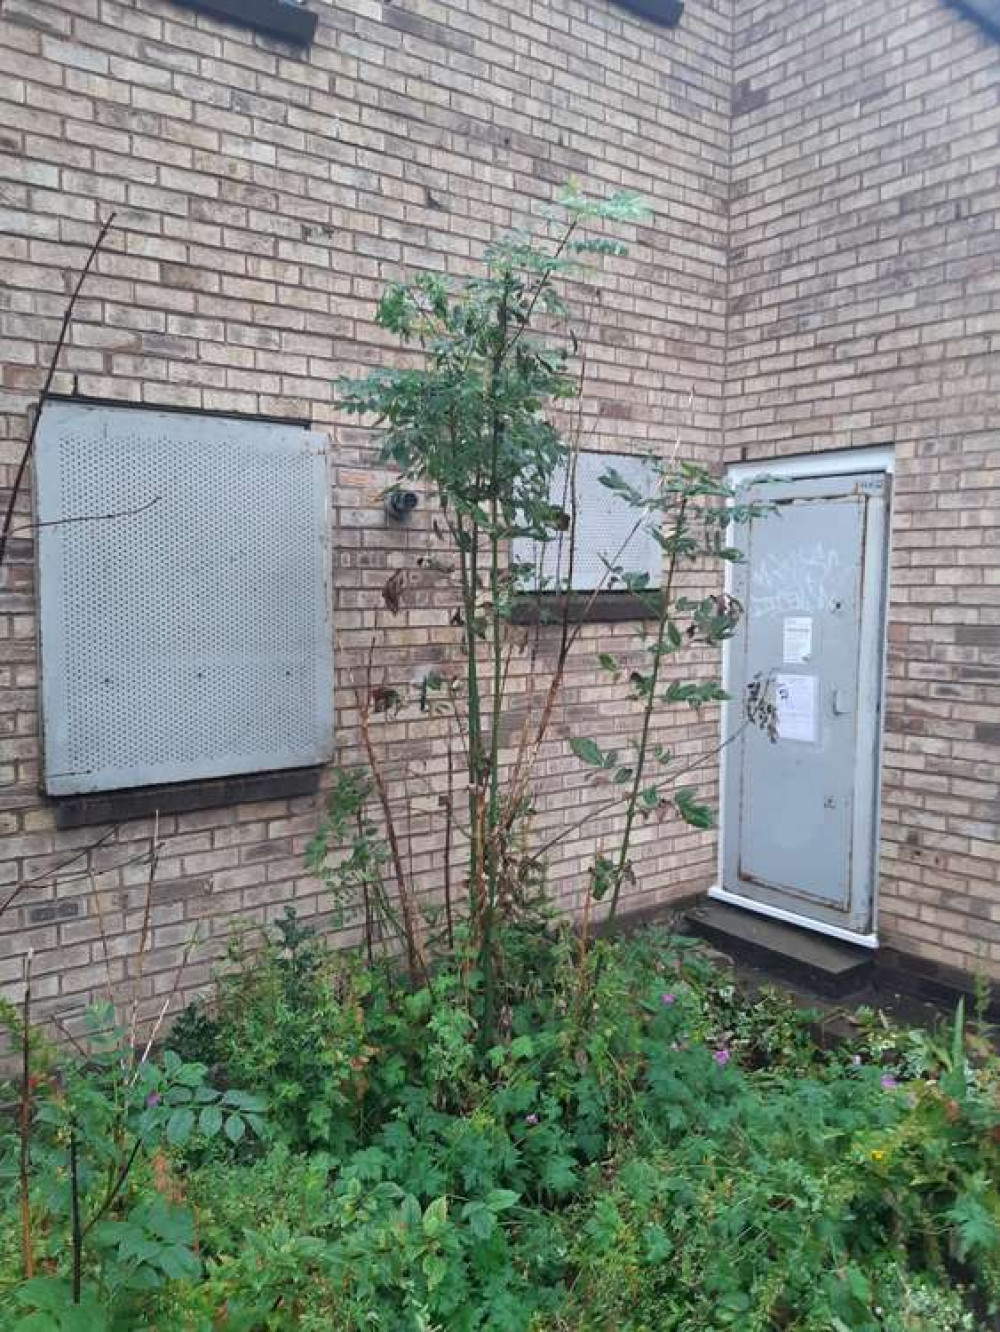 The Class B drug was spotted growing in Bolly on Harrop Road, near Church Street.